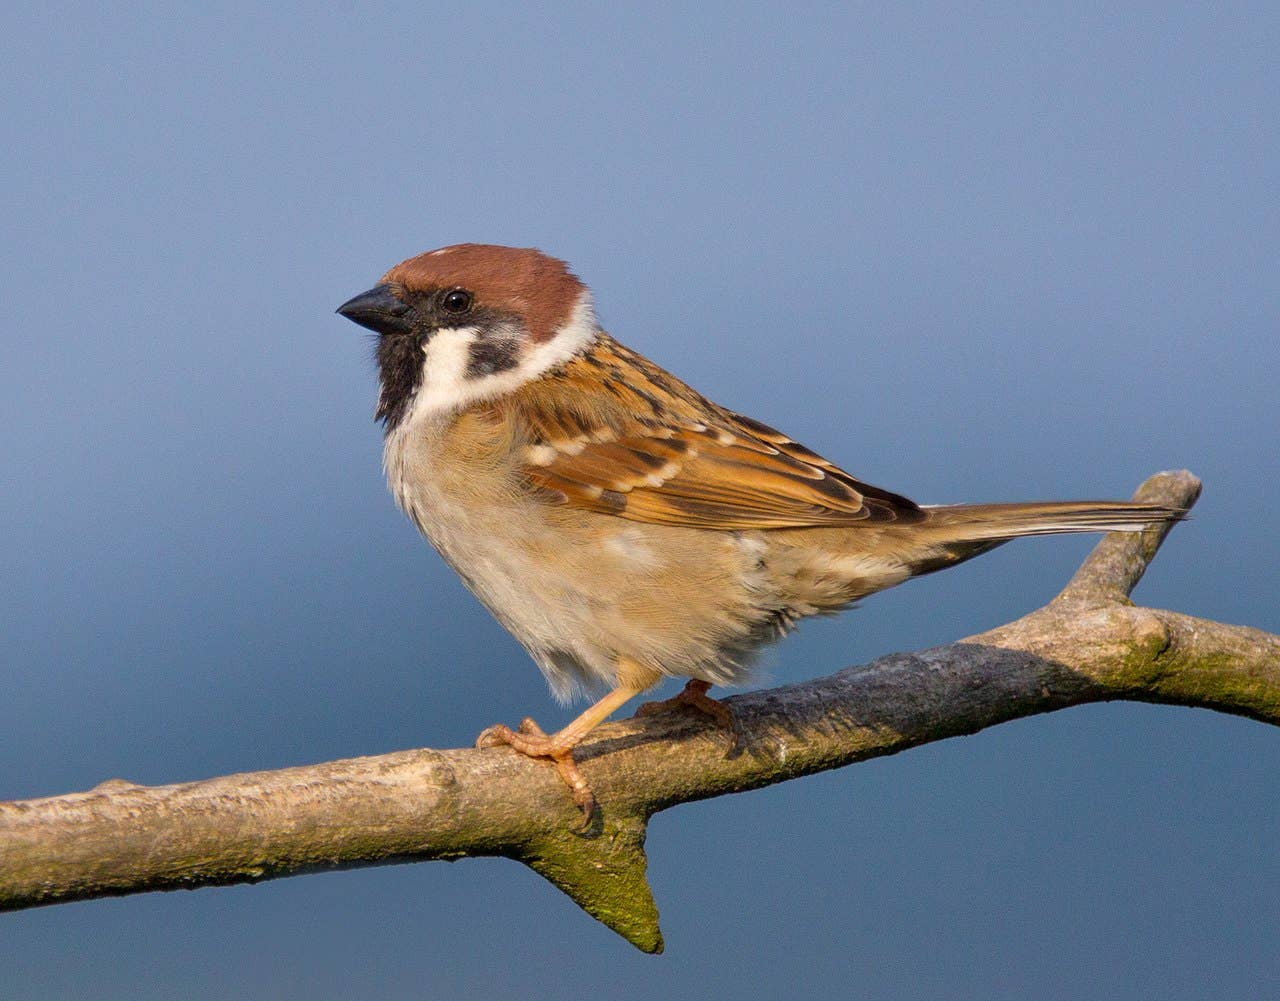 The Eurasian tree sparrow was the most notable target of the campaign. (Public domain)